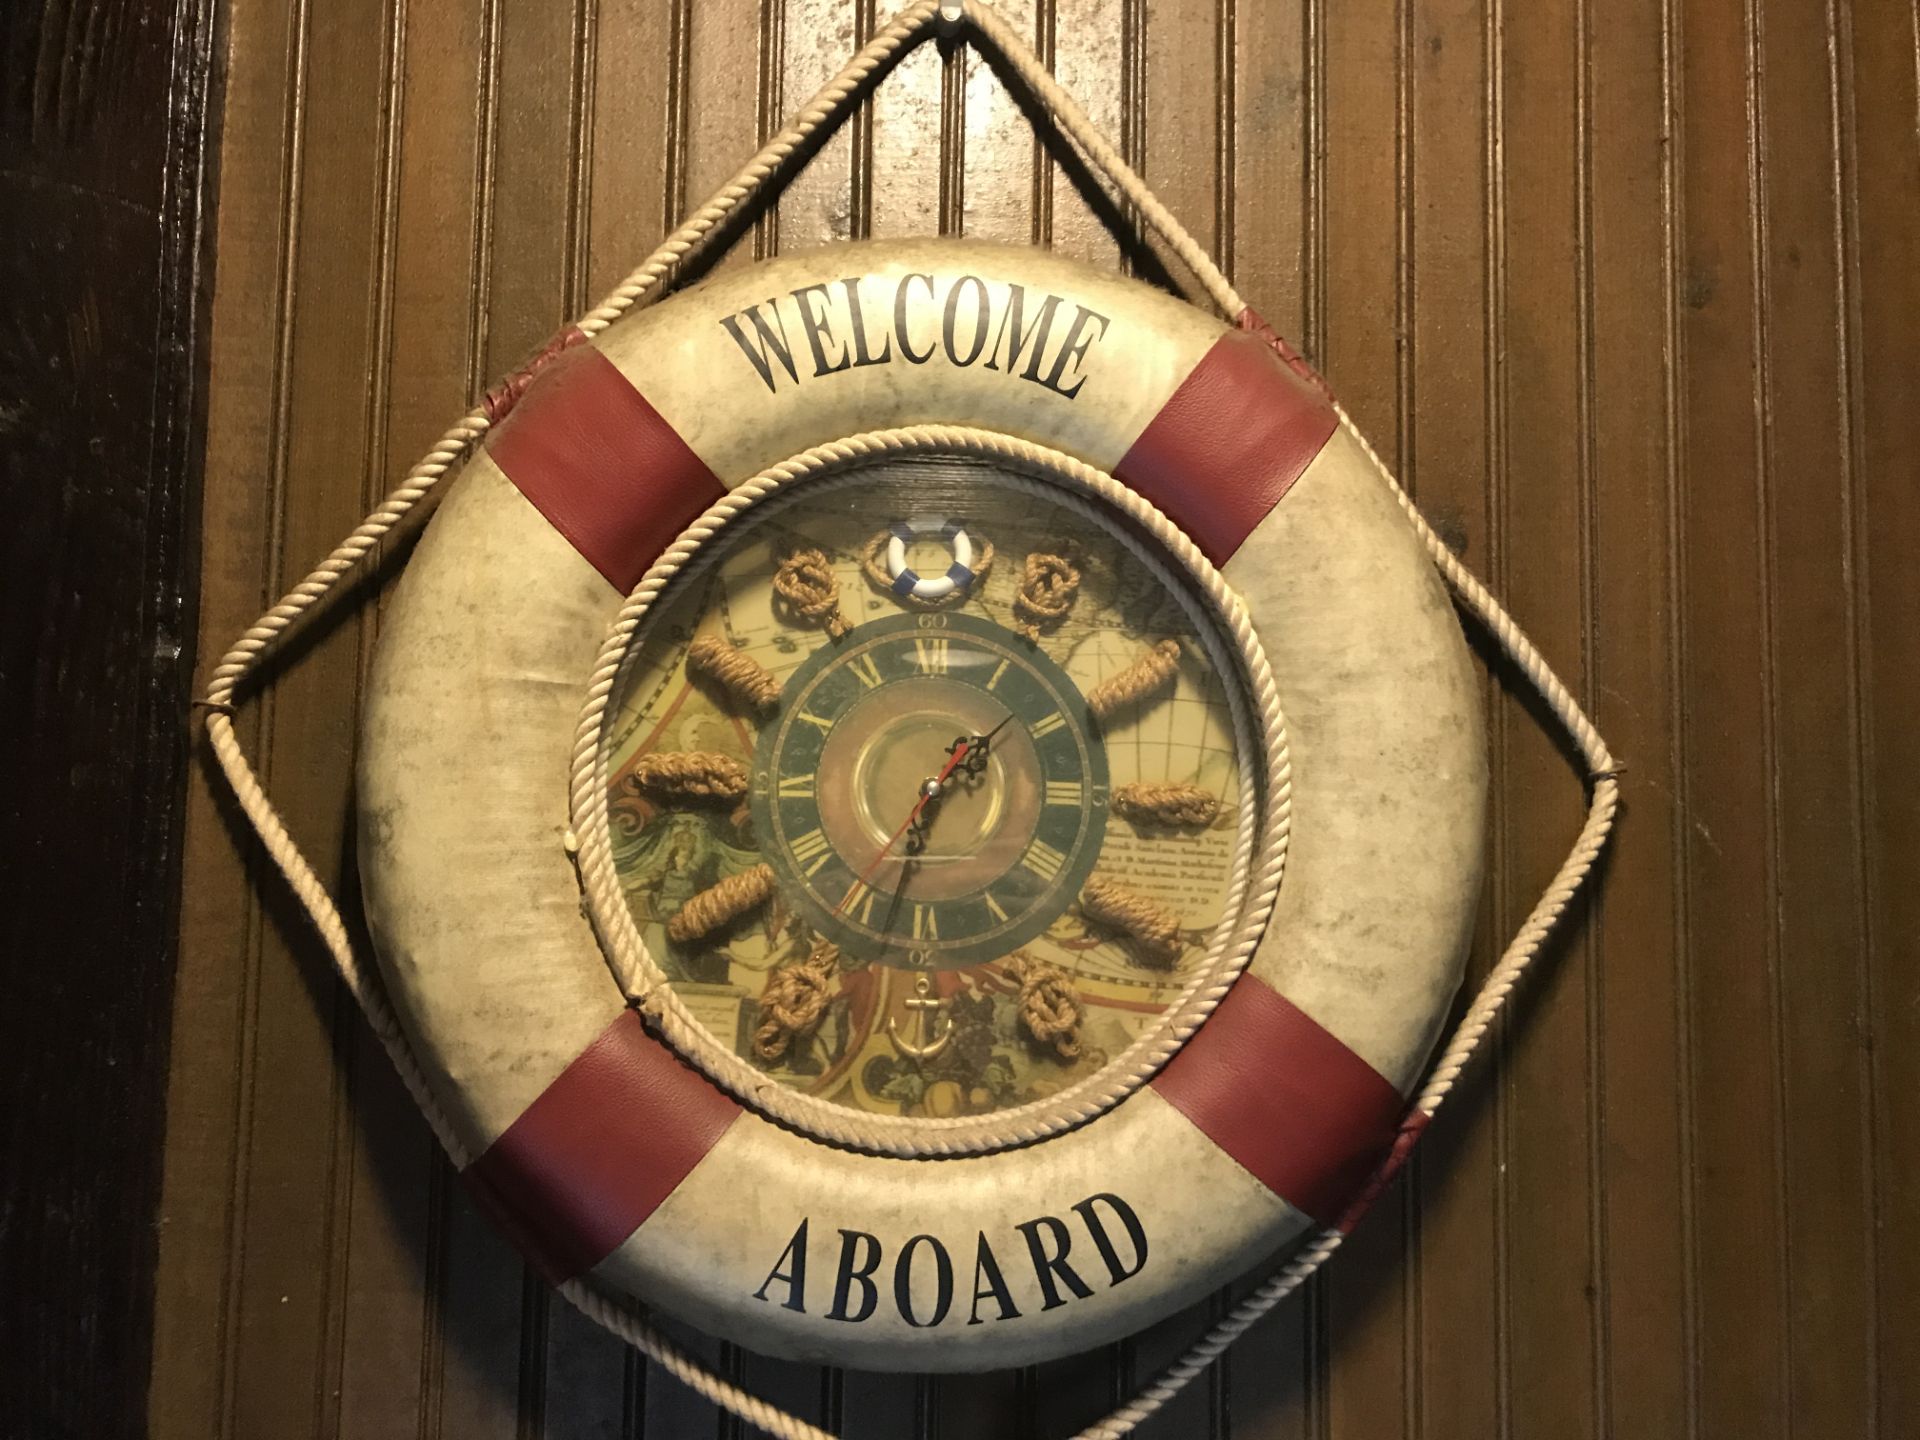 Welcome Aboard Life Ring Clock